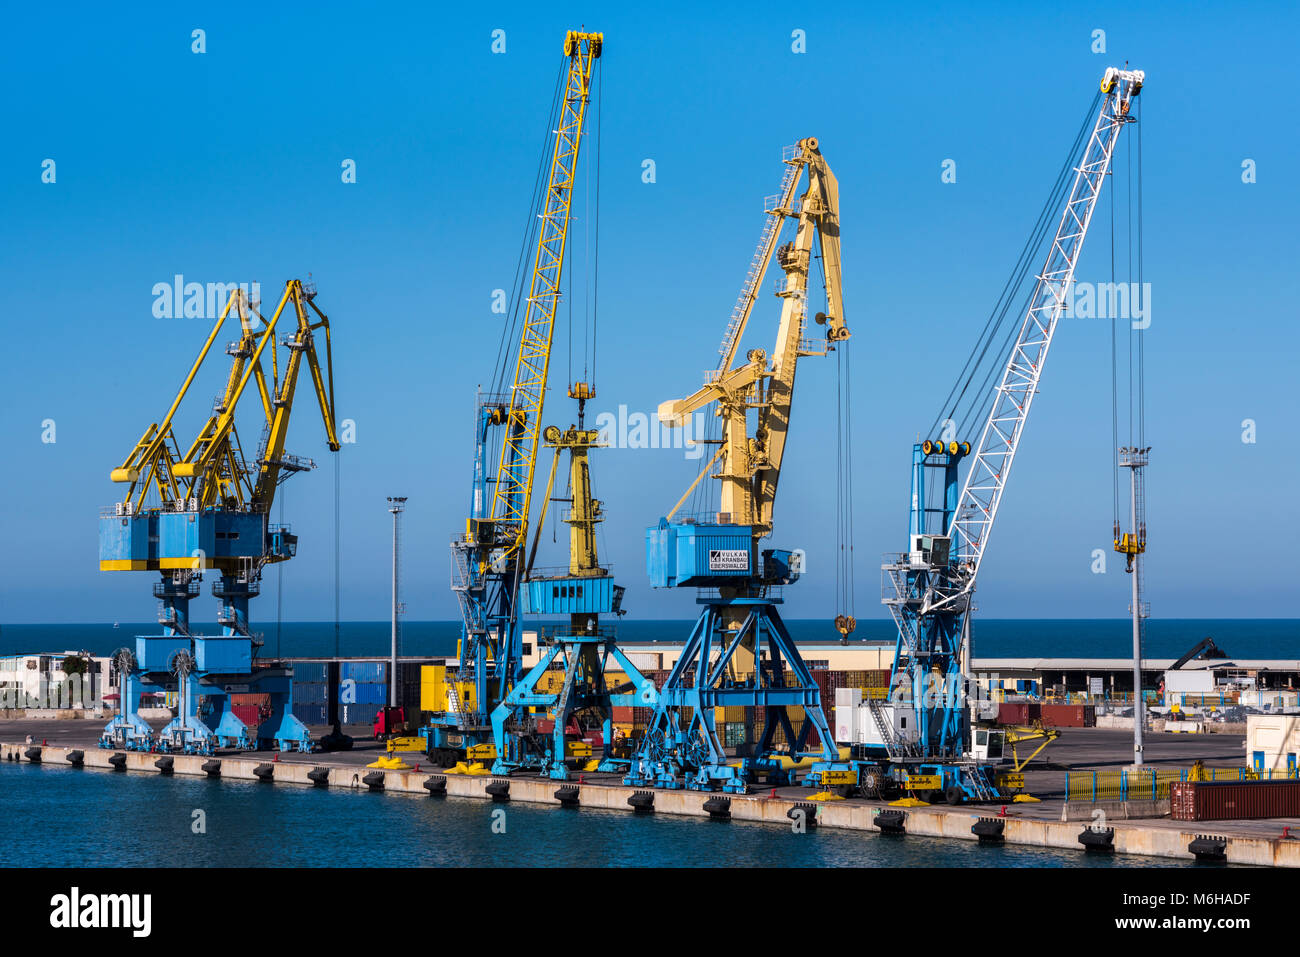 Durres, Albania - July 28, 2017: Cranes lined up in the harbor for loading containers for shippment Stock Photo